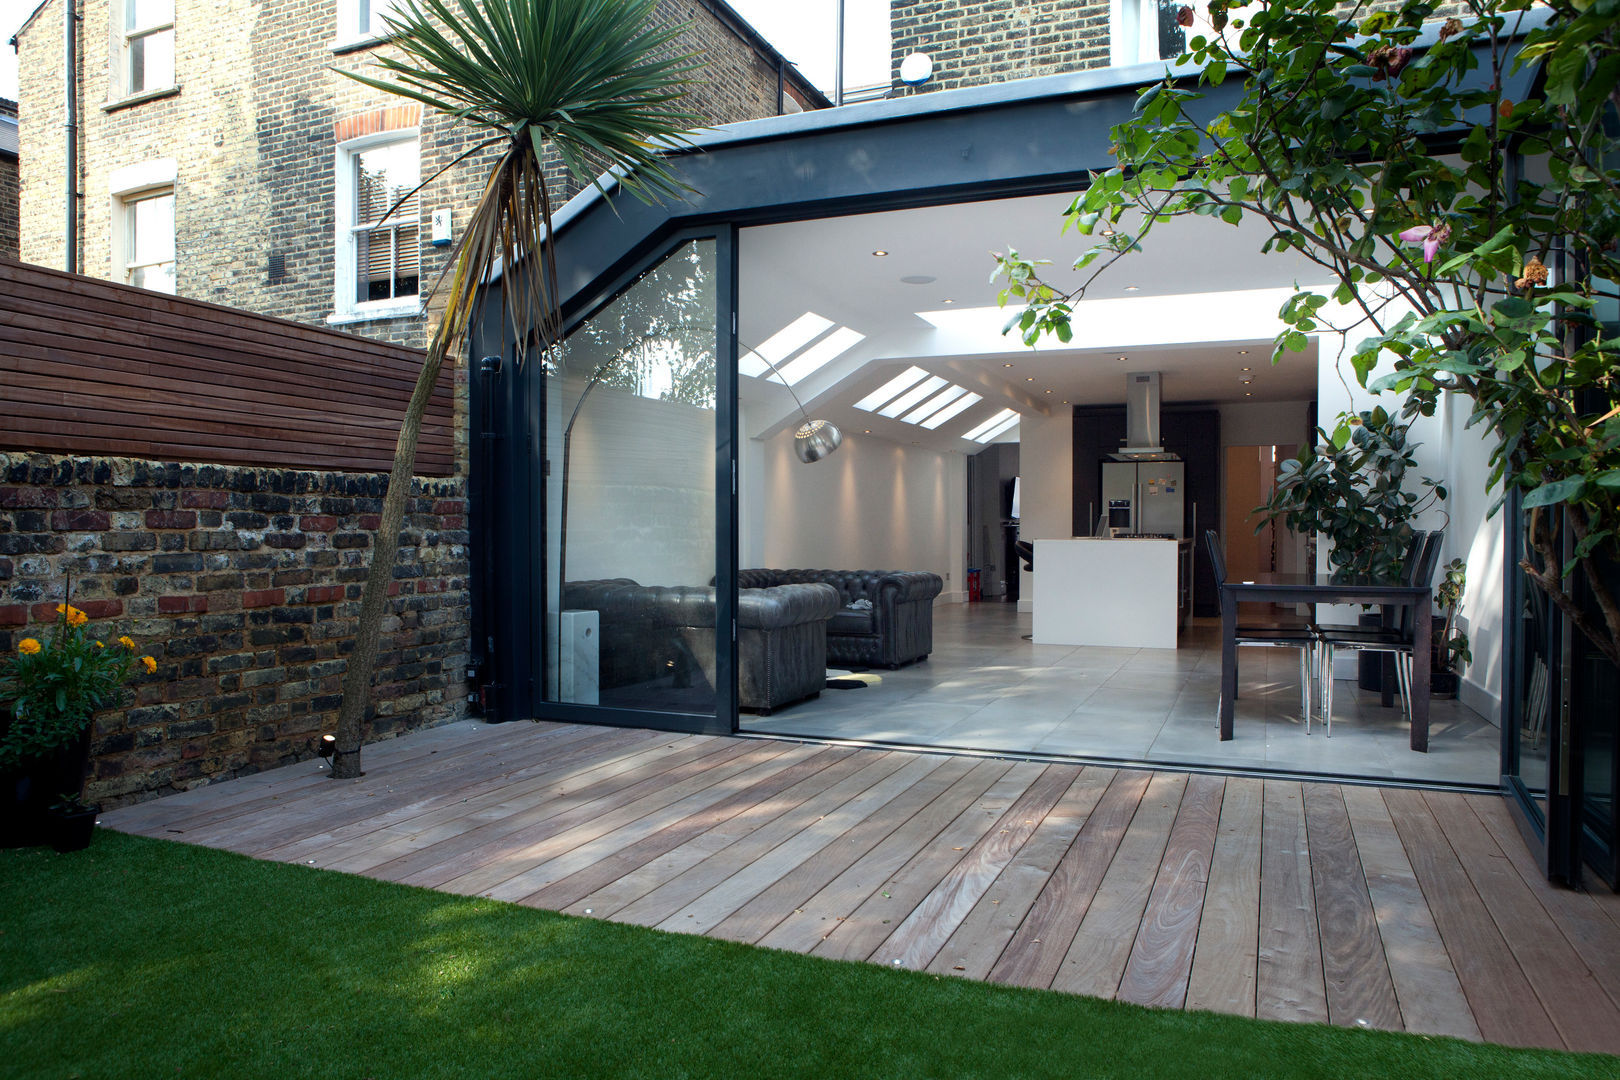 inside/out homify Modern houses london,extension,architecture,glass,open plan,kitchen,folding doors